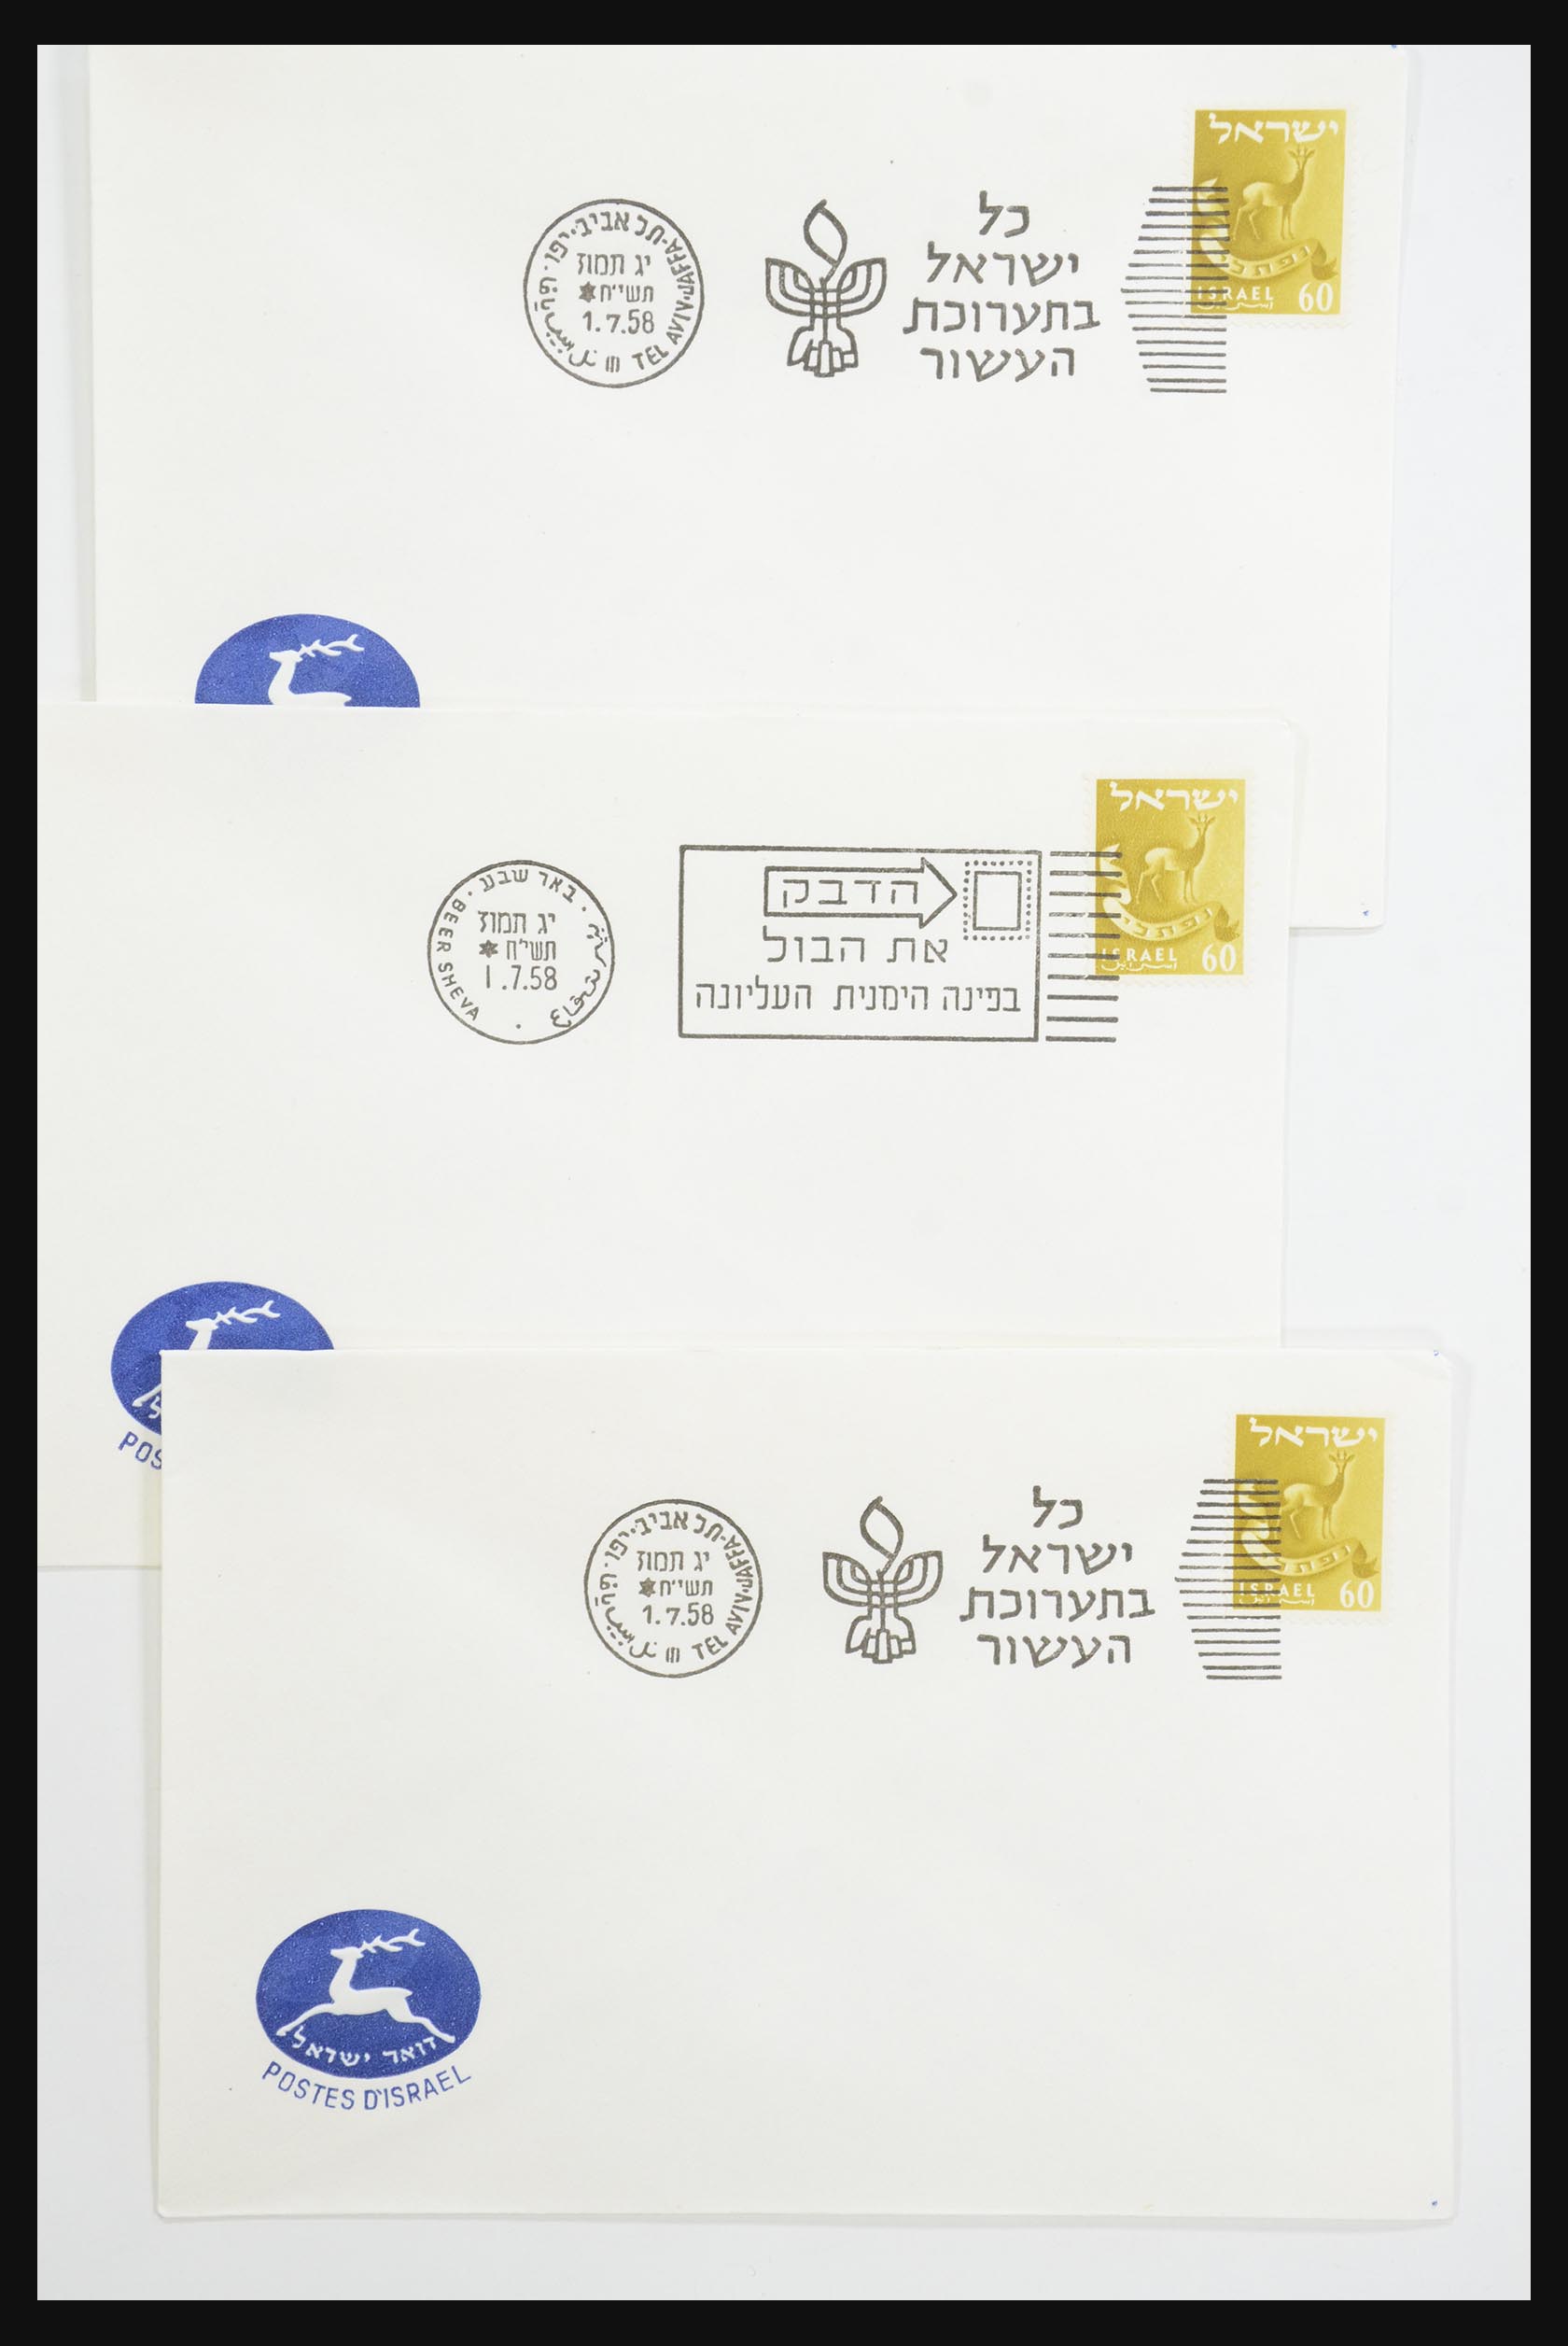 31924 074 - 31924 Israel first day cover collection 1957-2003.